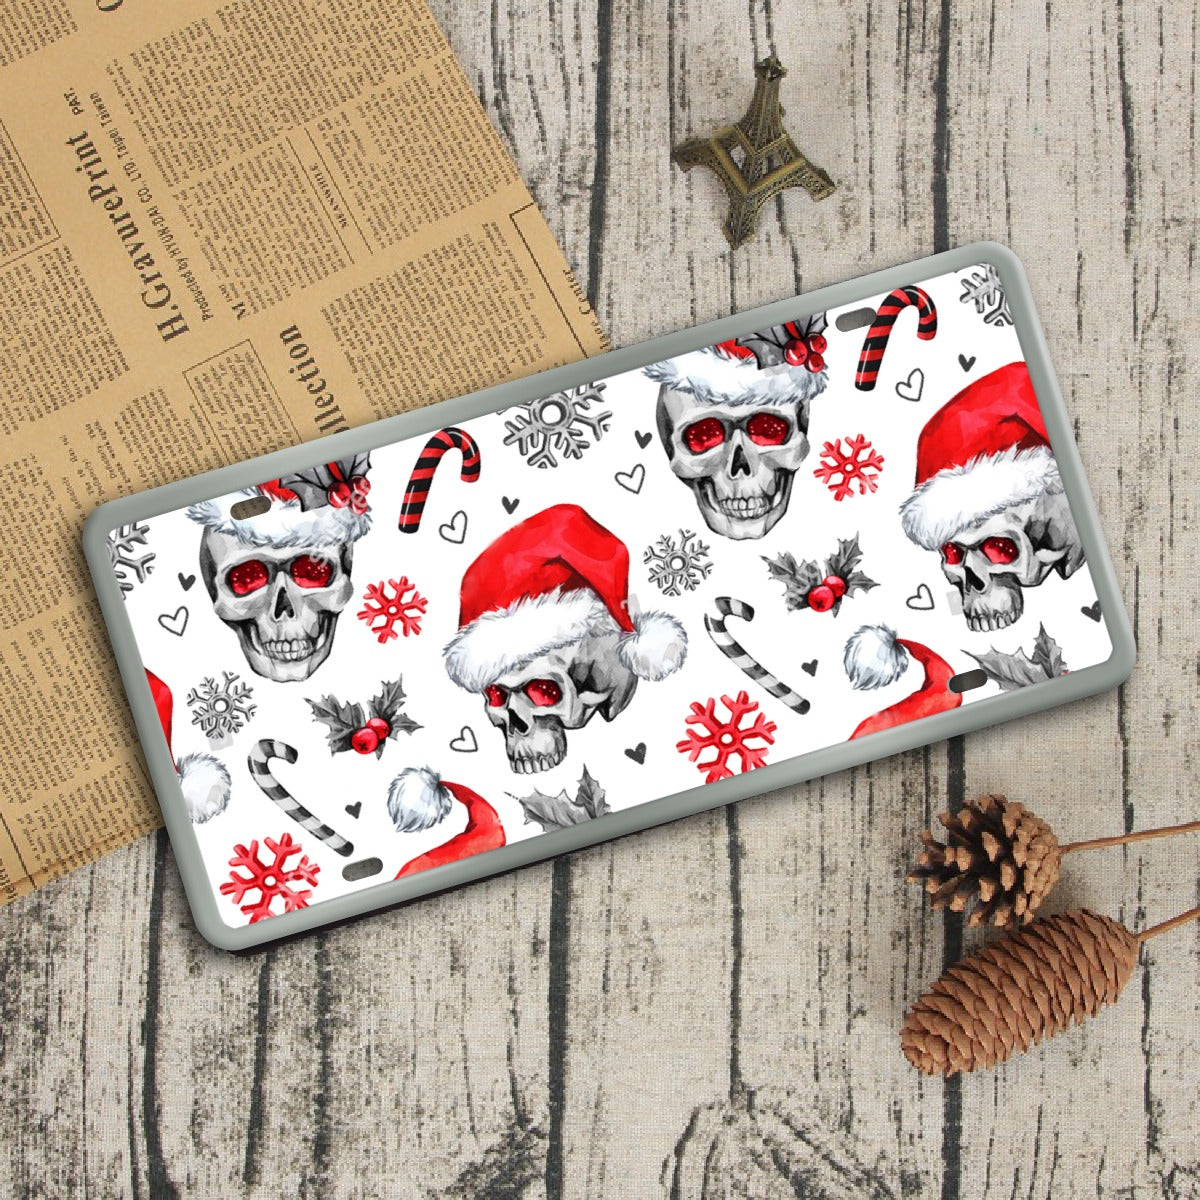 Skull santa claus license plate, gothic Vintage License Plate Decoration Painting